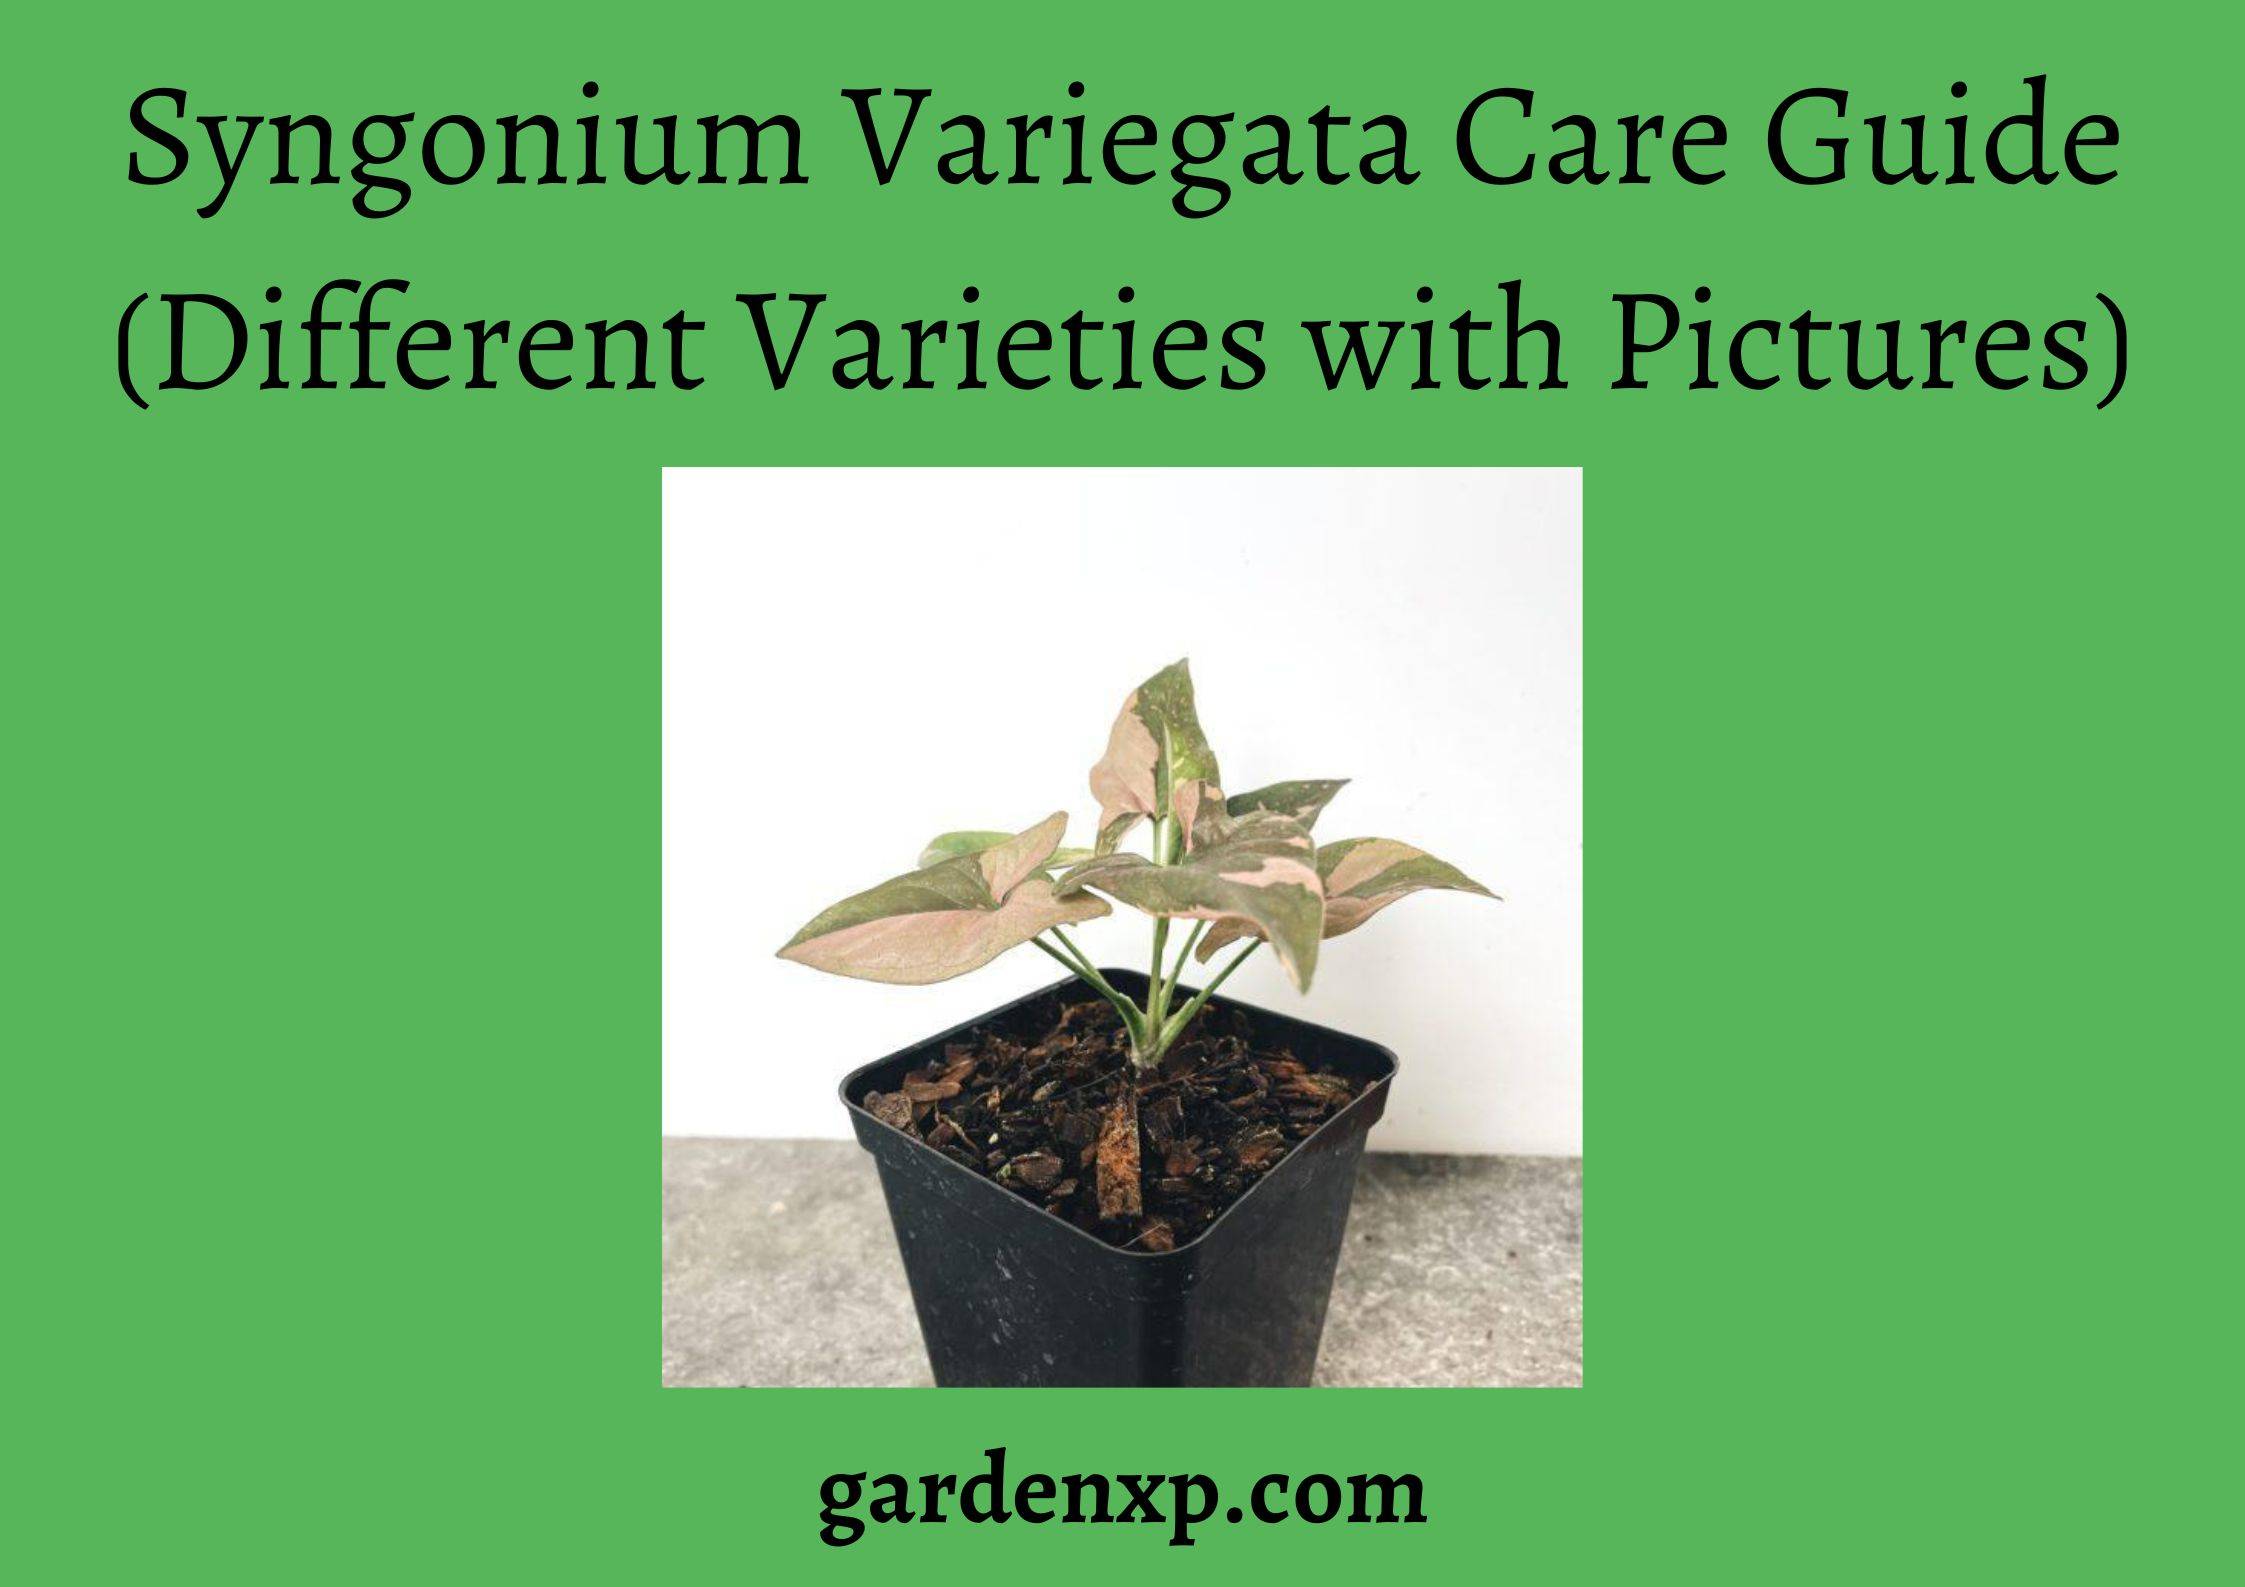 Syngonium Variegata Care Guide (Different Varieties with Pictures)